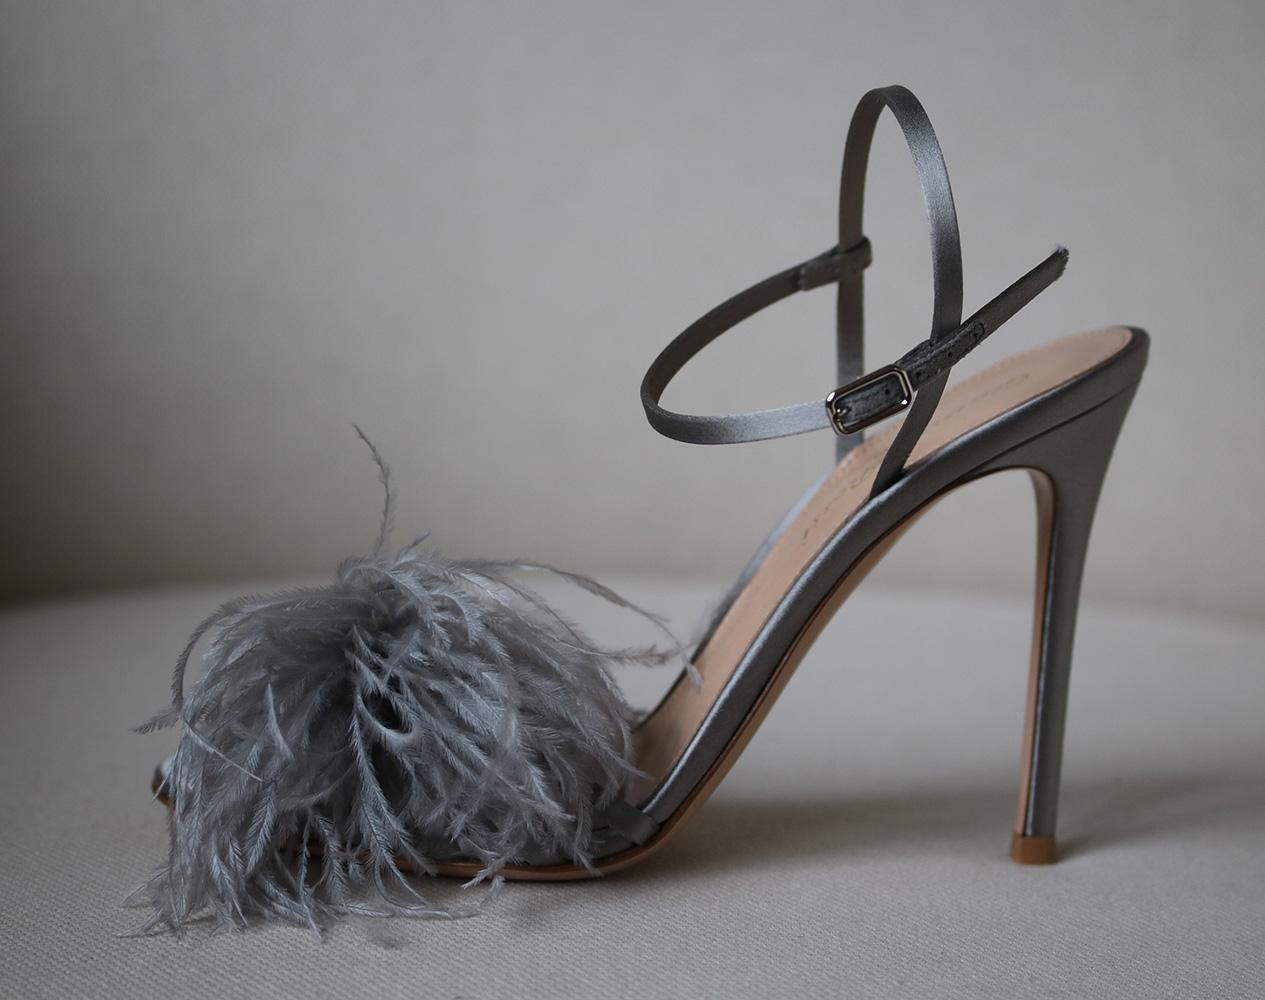 Gianvito Rossi satin sandal with ostrich feather trim. 4.3